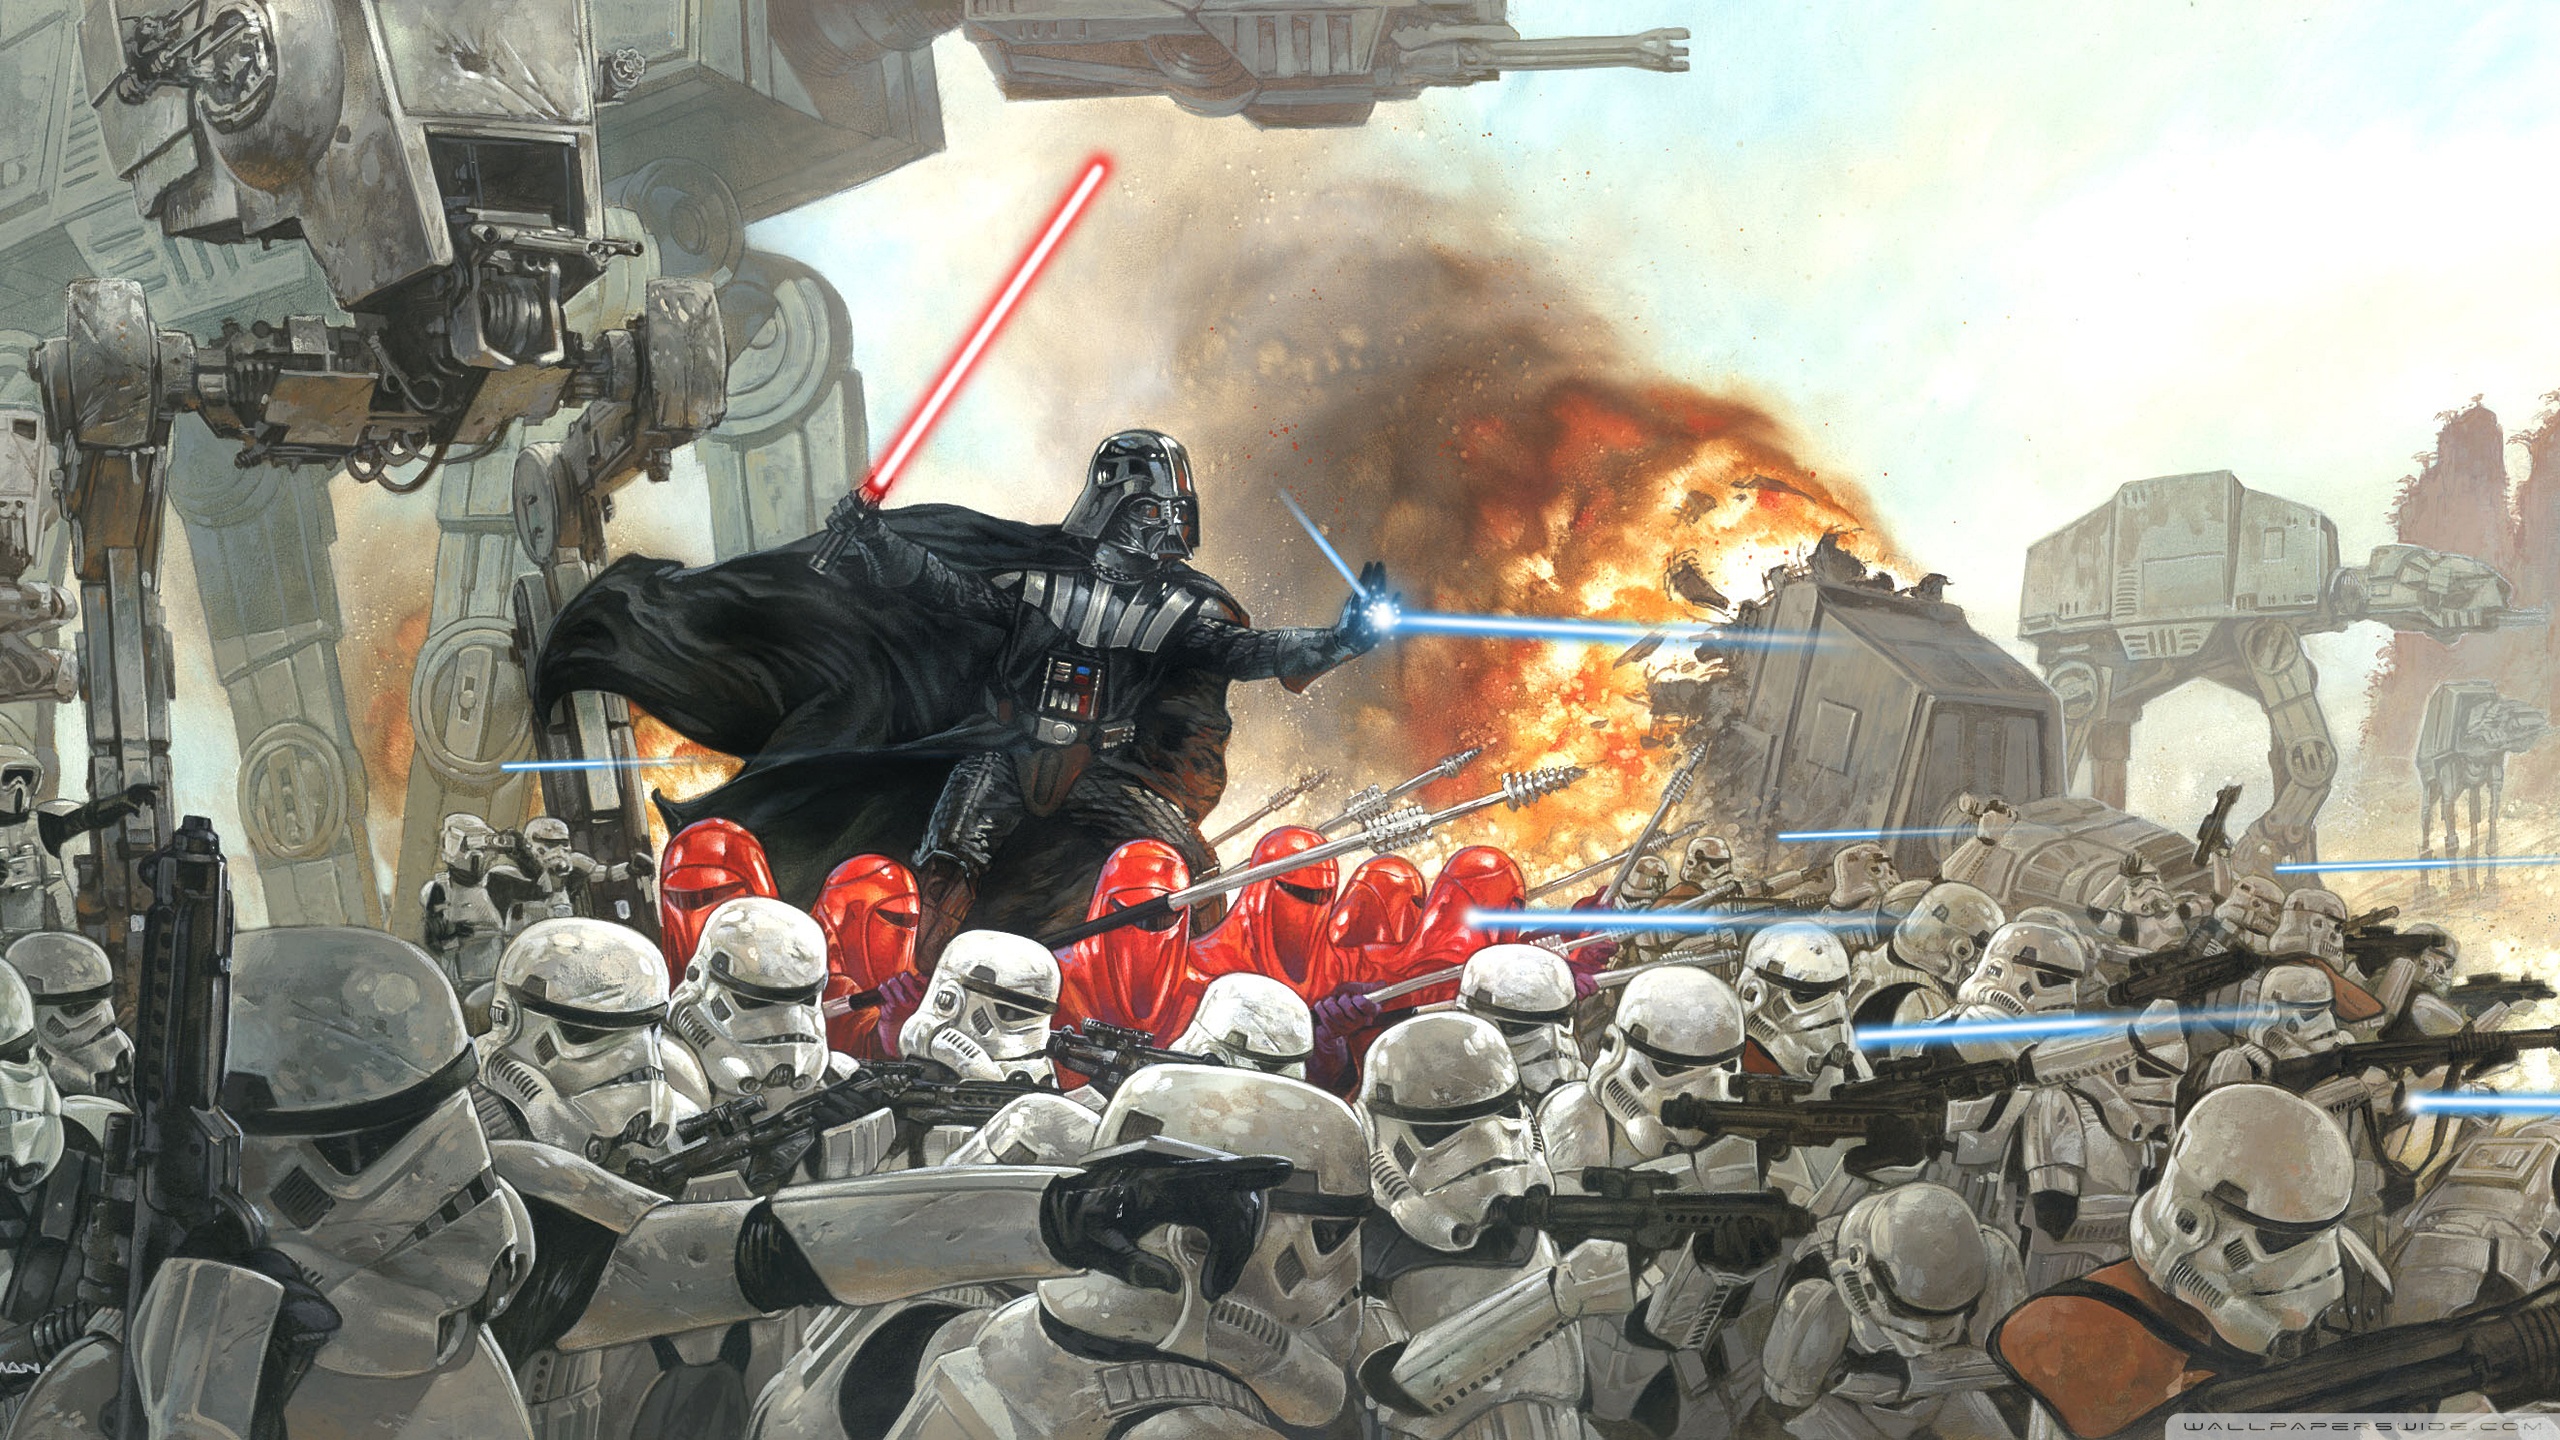 darth vader wallpaper,action adventure game,rebellion,pc game,strategy video game,games